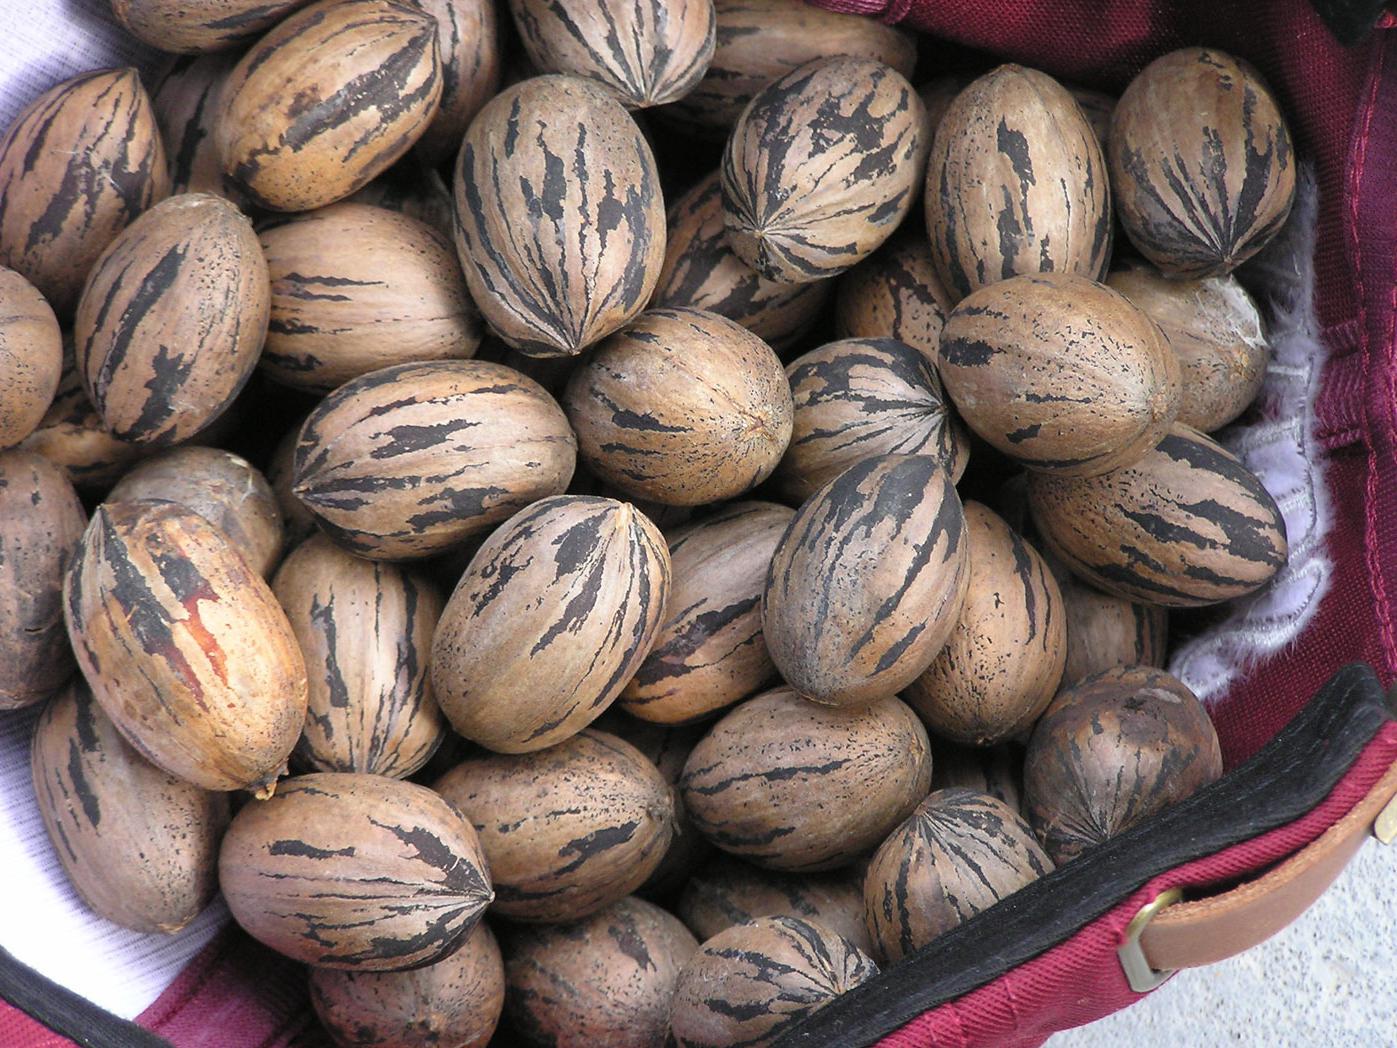 Tropical Storm Lee's rains saved much of this year's pecan crop and growers are expecting good yields. (file photo)